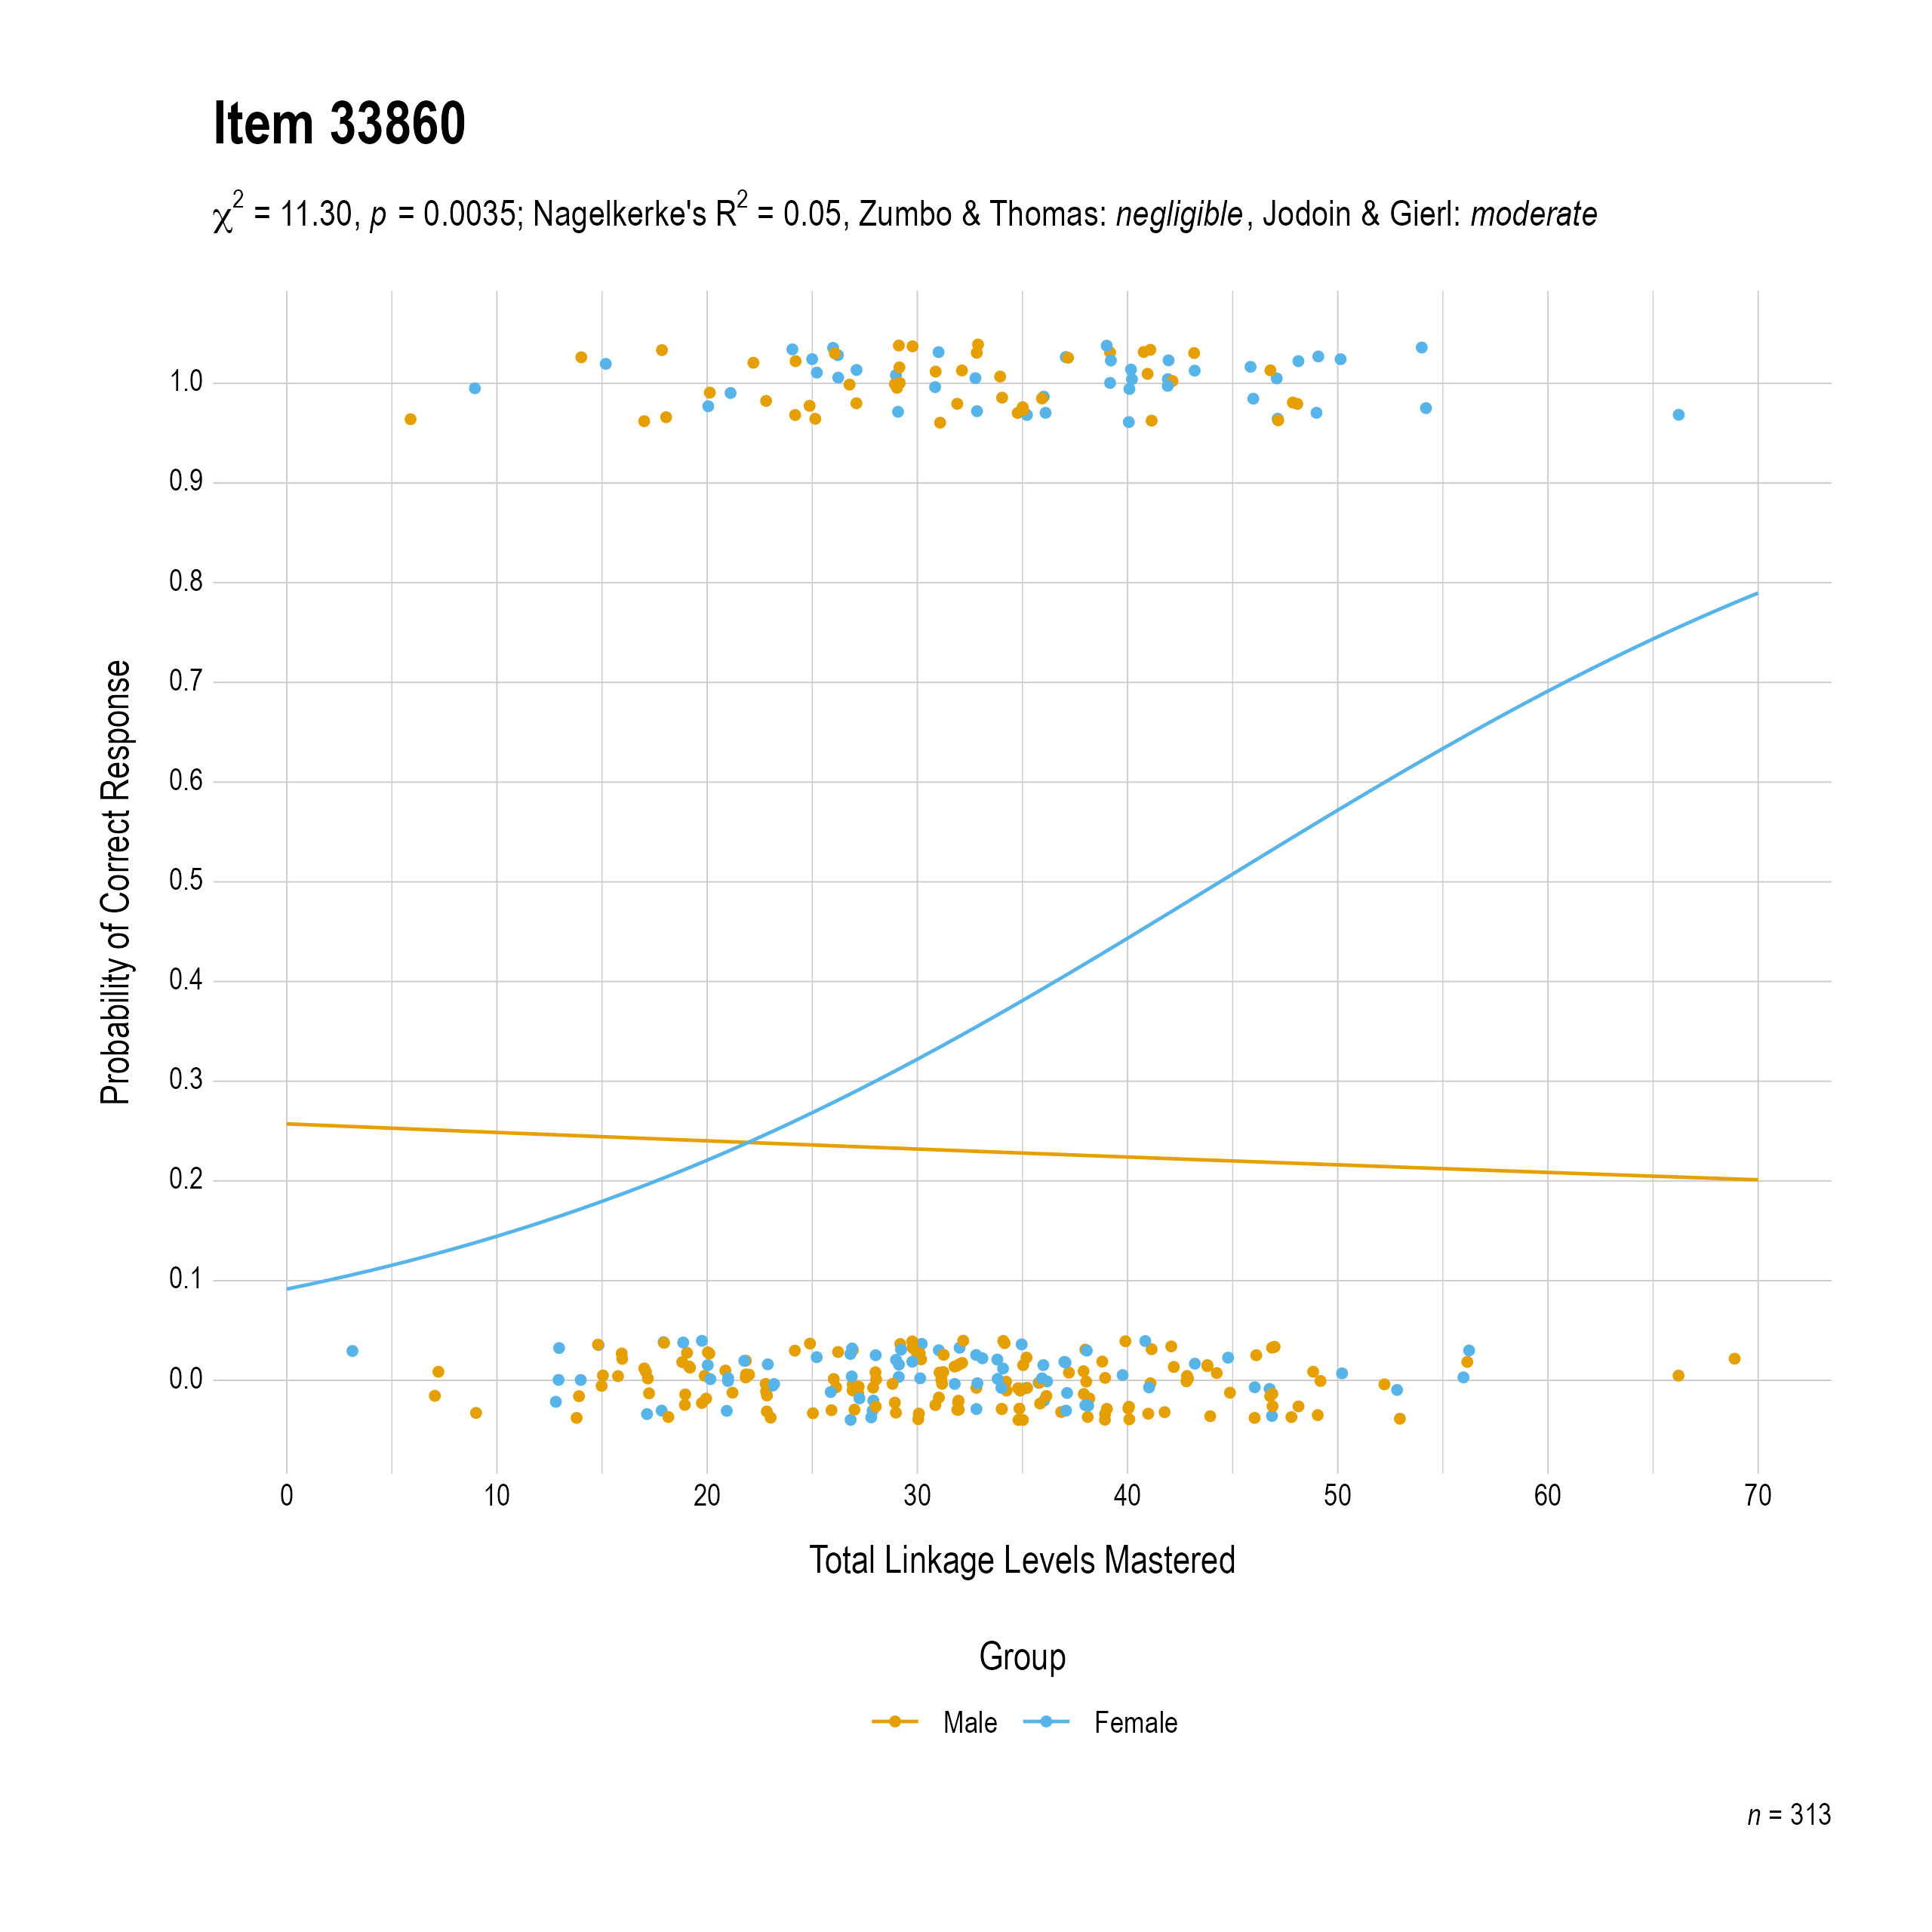 The plot of the combined gender differential item function evidence for English language arts item 33860. The figure contains points shaded by group. The figure also contains a logistic regression curve for each group. The total linkage levels mastered in is on the x-axis, and the probability of a correct response is on the y-axis.